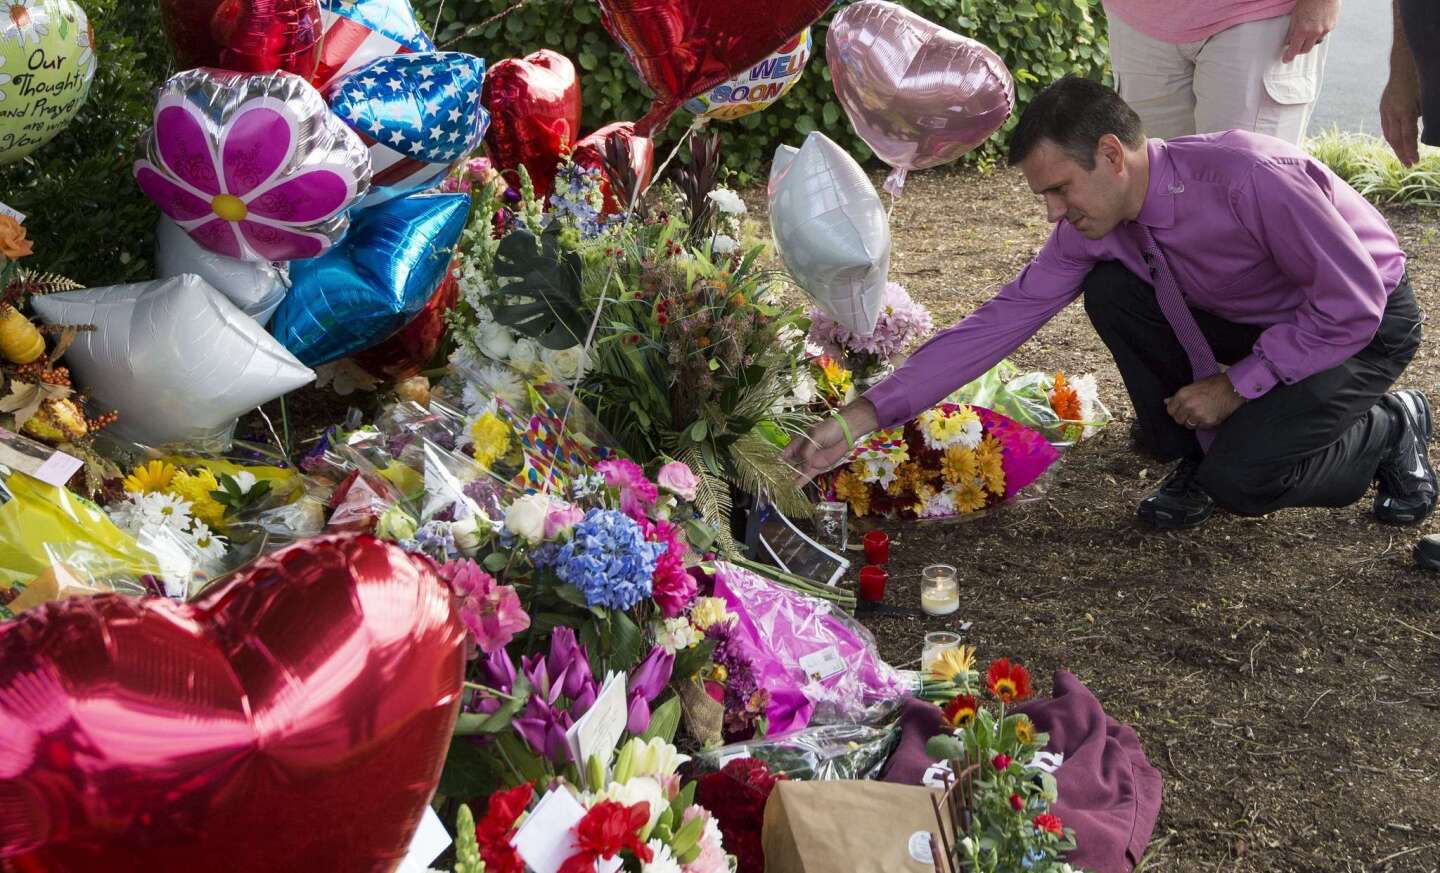 WDBJ-TV weatherman Leo Hirsbrunner views the makeshift memorial at the gate of WDBJ's television studios in Roanoke, Va. The former TV reporter suspected of shooting and killing two other journalists during a live broadcast before killing himself warned that he had been a "human powder keg ... just waiting to go BOOM."